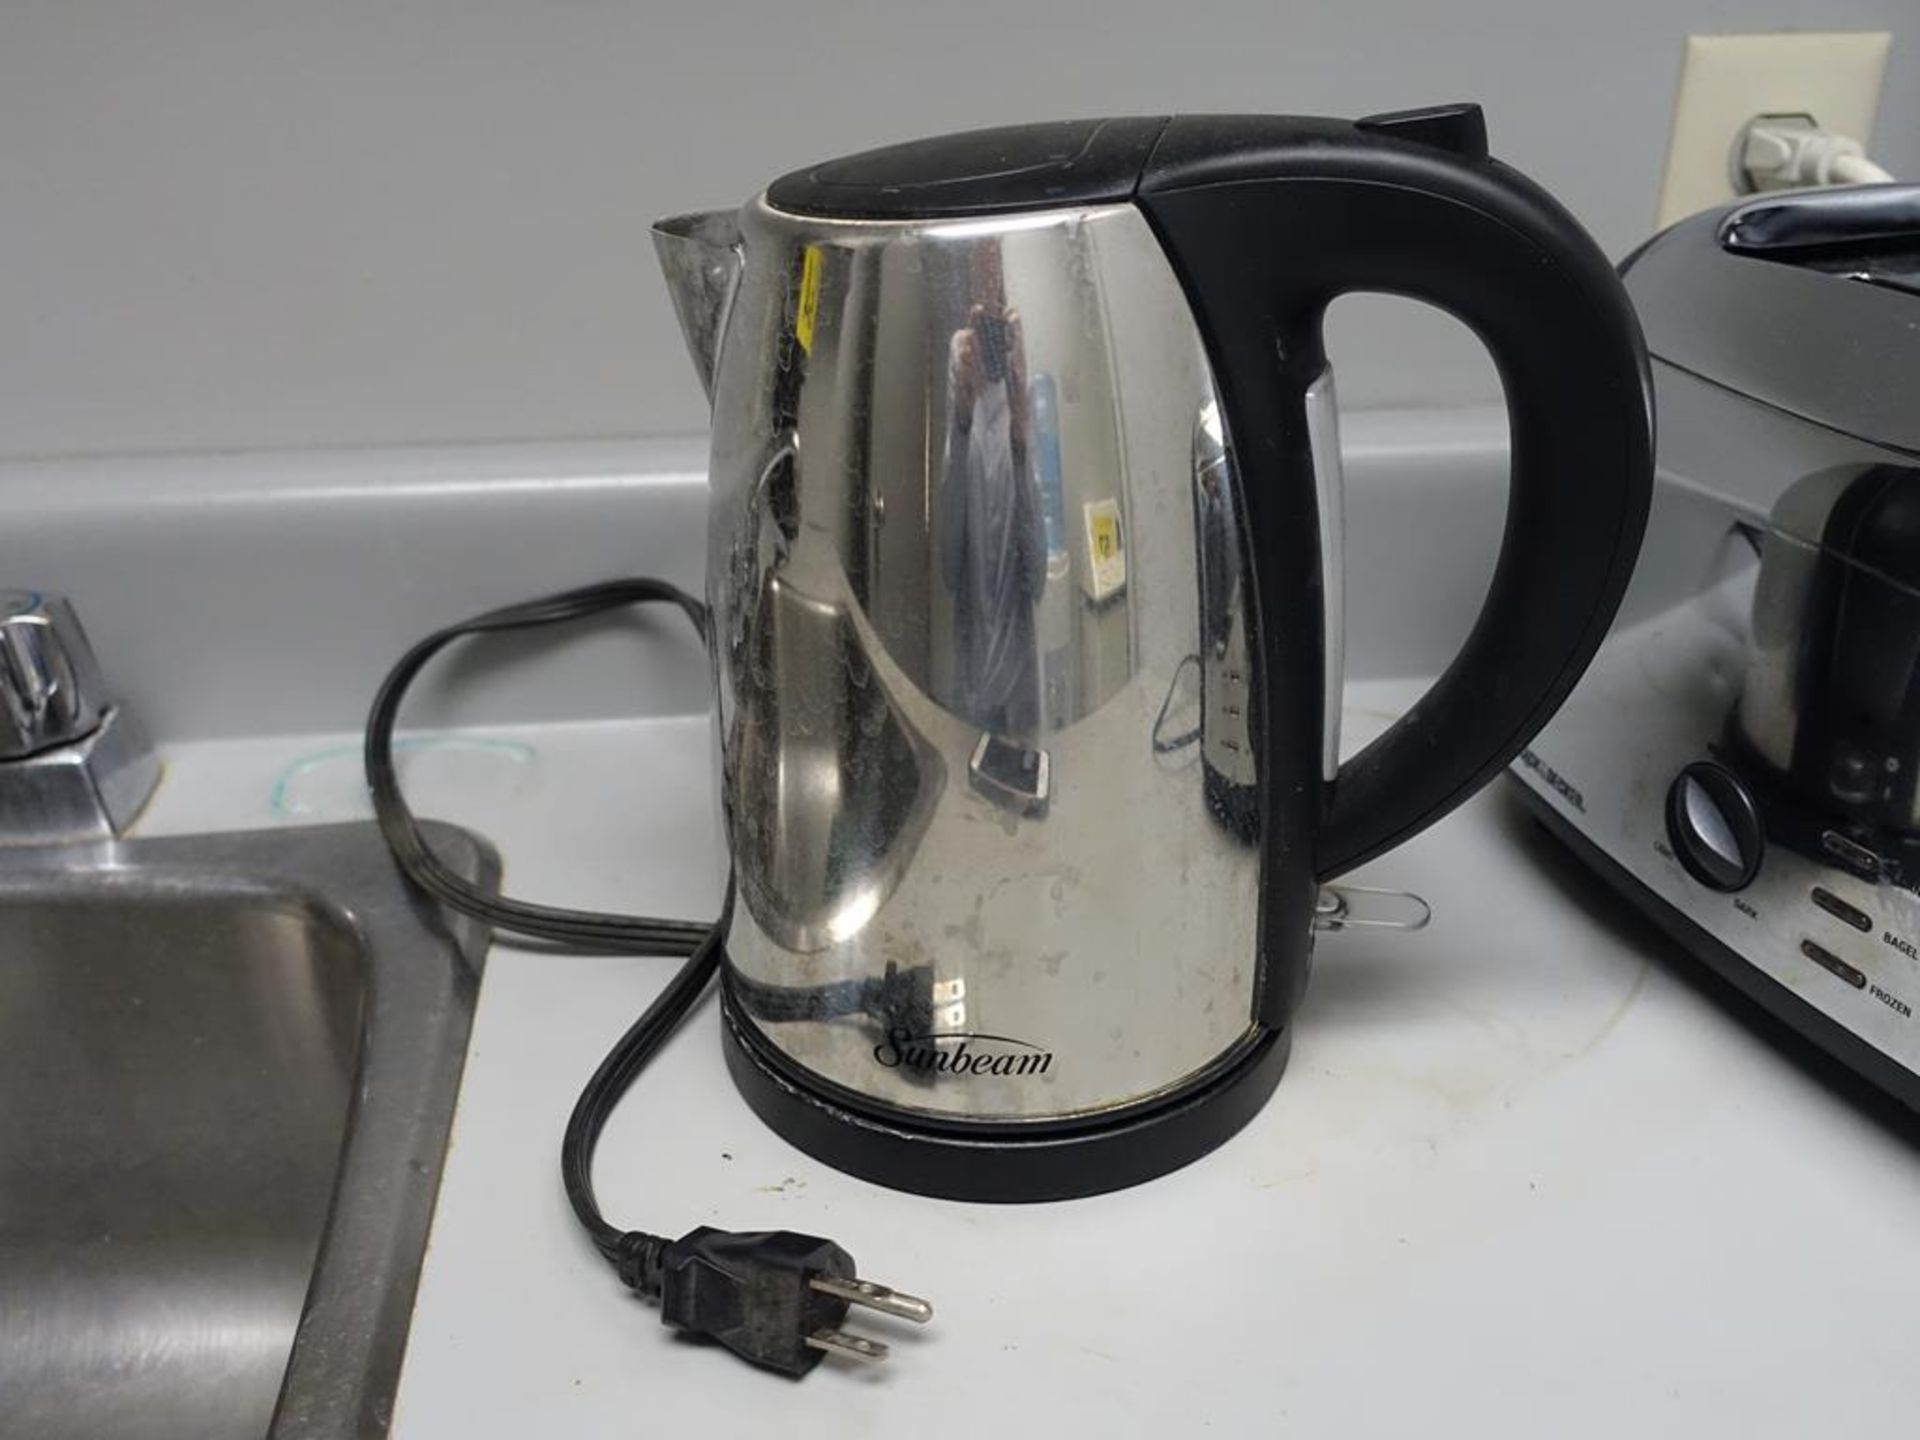 LOT OF COFFEE MACHINE, BLACK & DECKER, TOASTER AND SUNBEAM, ELECTRIC KETTLE - Image 3 of 4